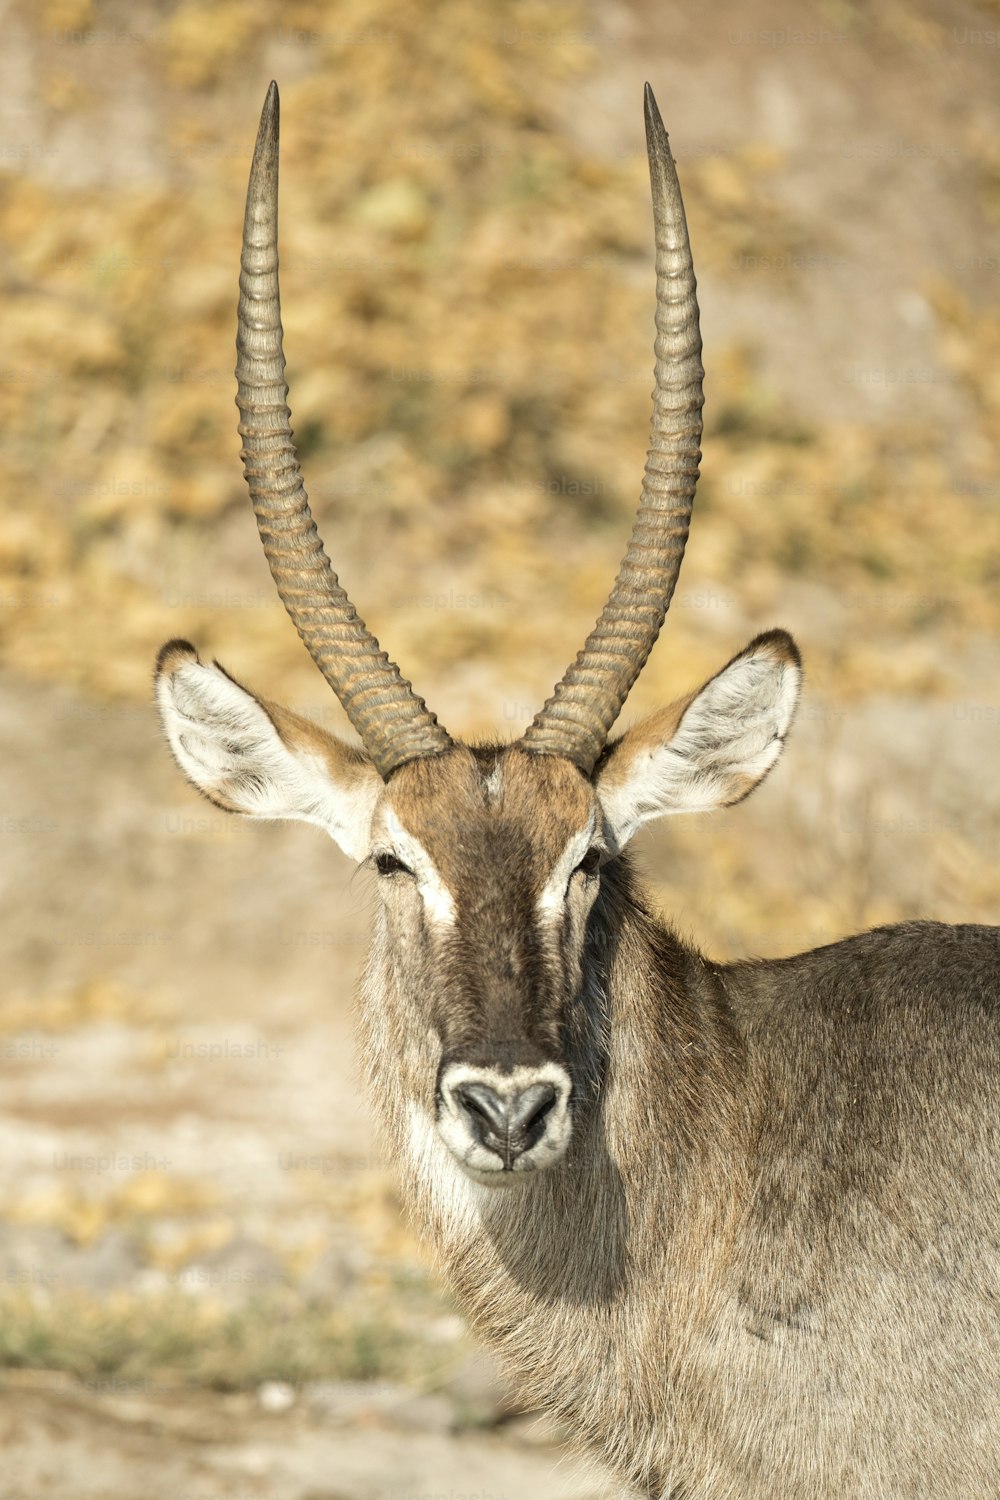 A waterbuck on the bank of the Chobe River, Botswana.